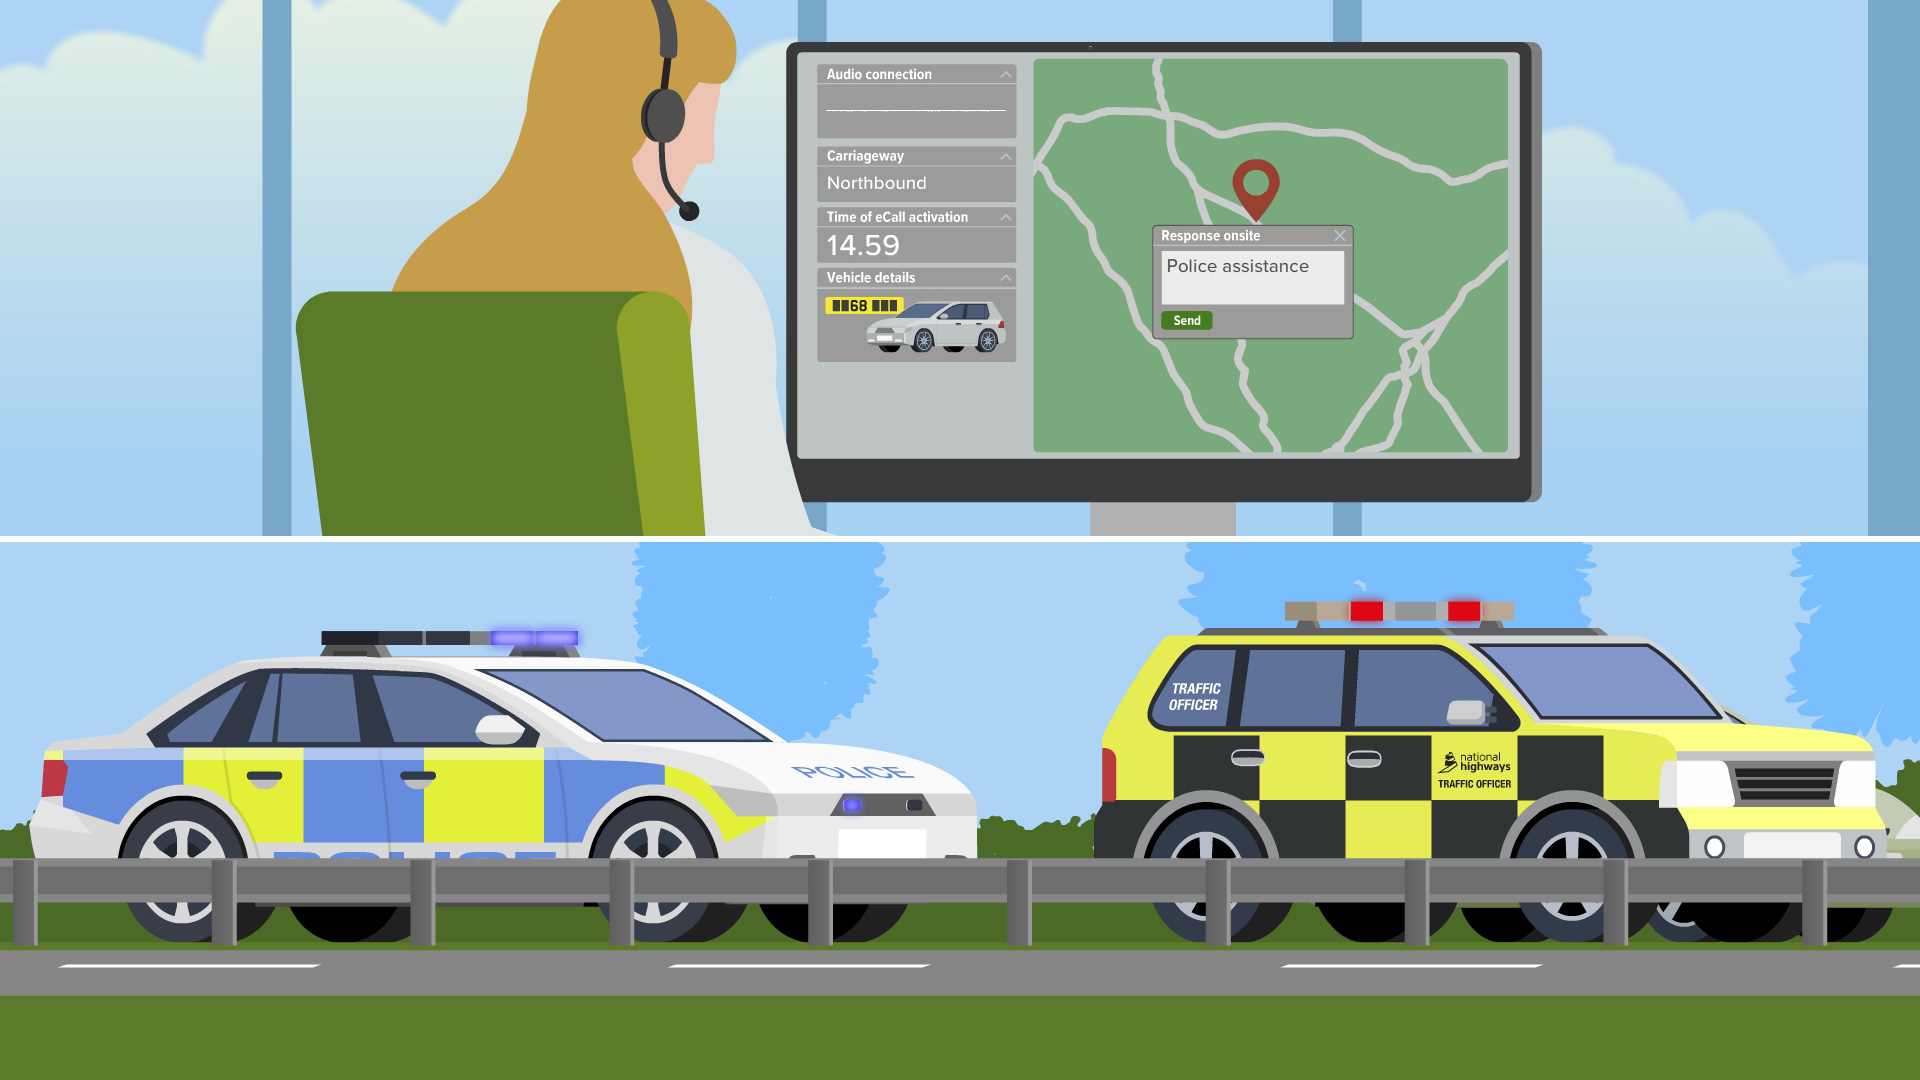 Illustration of operator contacting police placed at the top of the image and police car and traffic officer vehicle placed at the bottom of the image